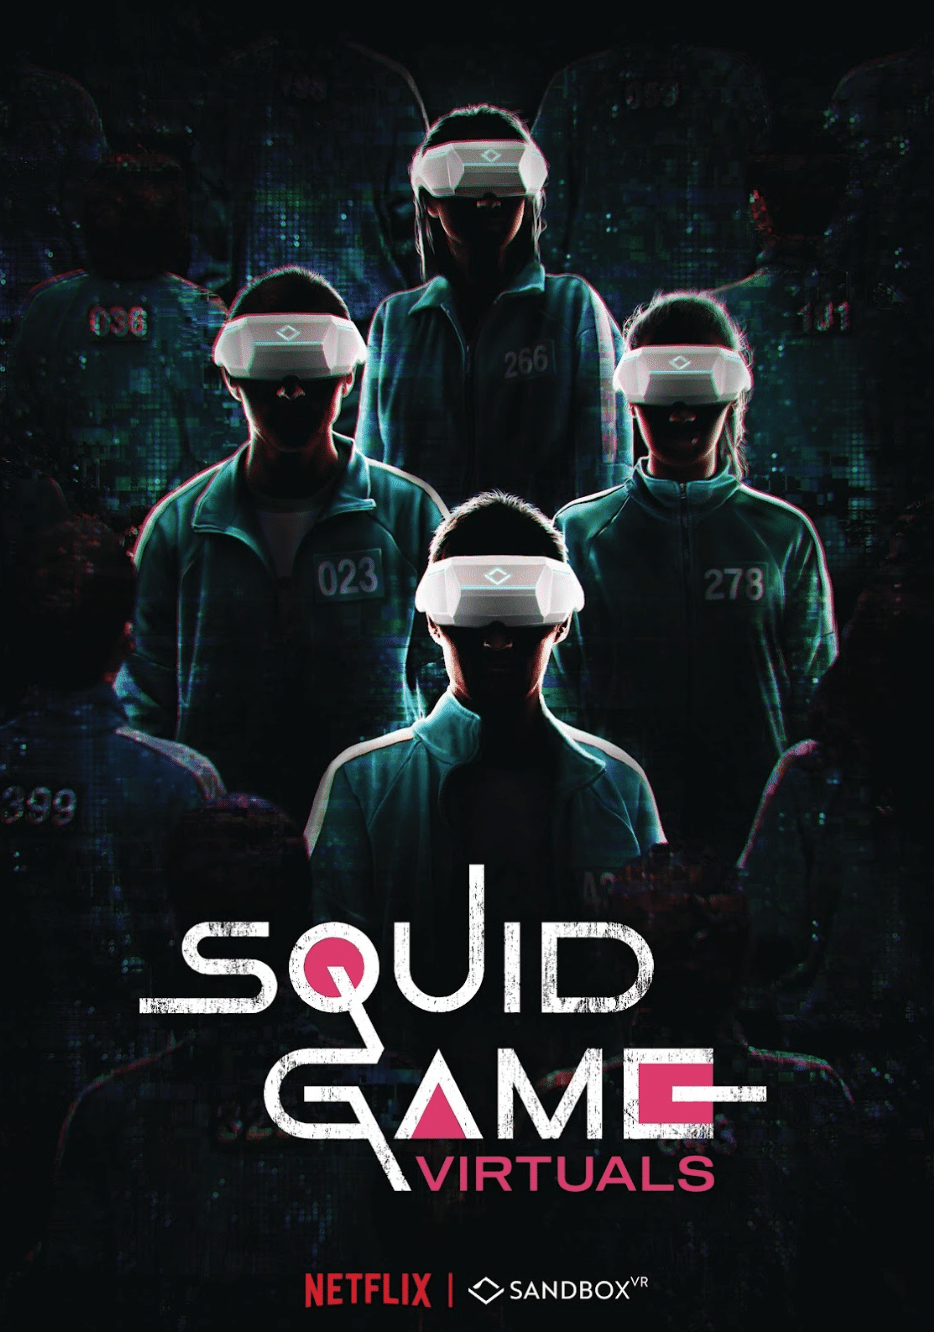 The poster for Squid Game Visuals